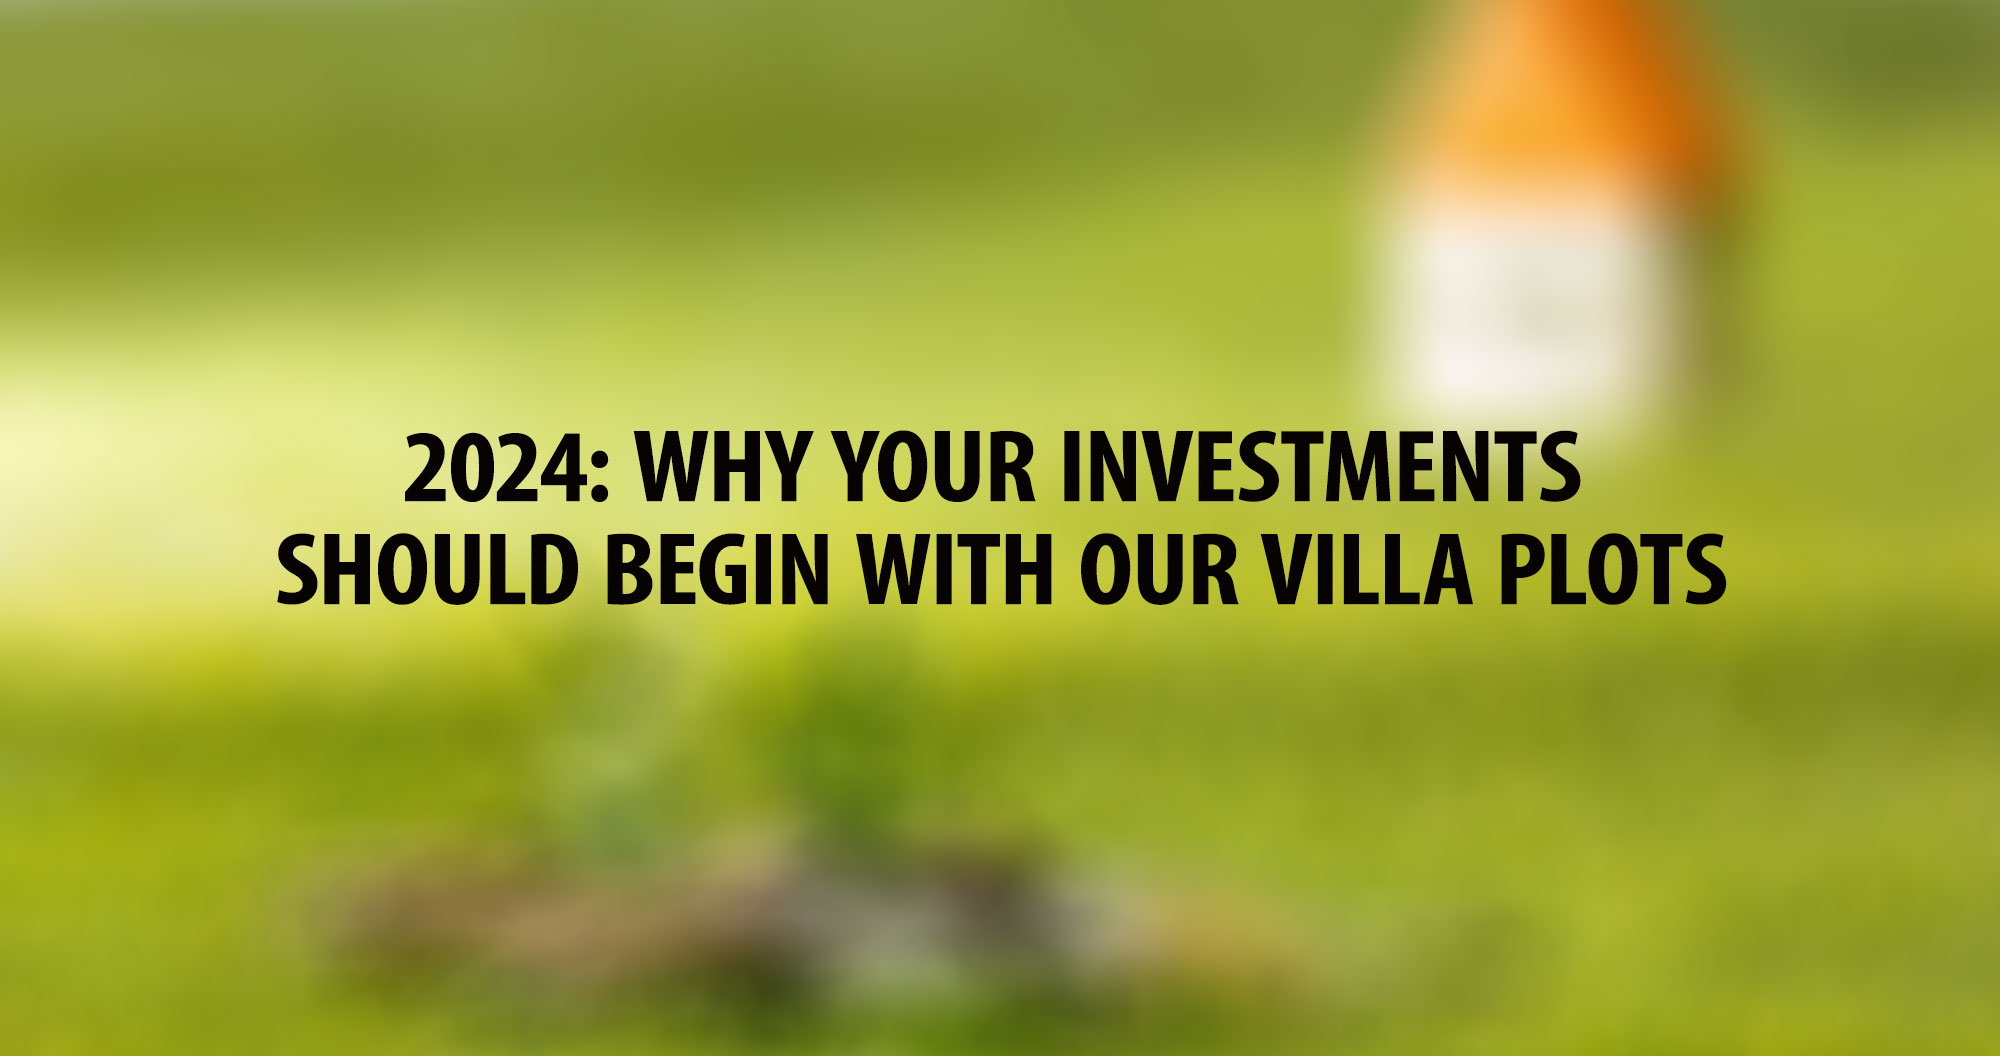 2024: Why your investments should begin with our villa plots